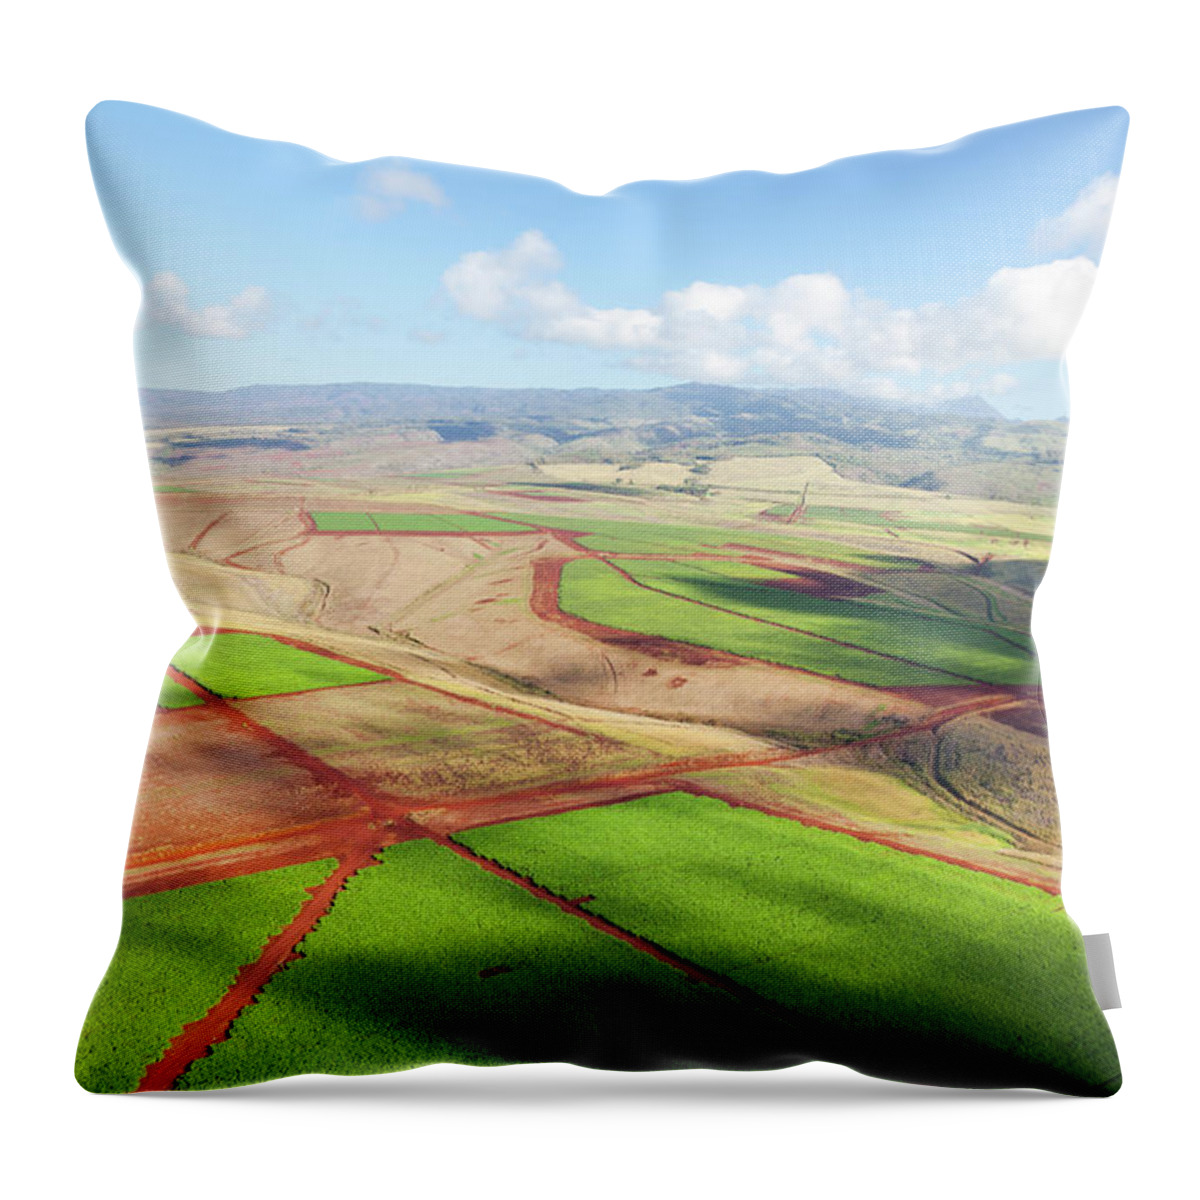 Scenics Throw Pillow featuring the photograph Coffee Plantations, Kauai by Michaelutech